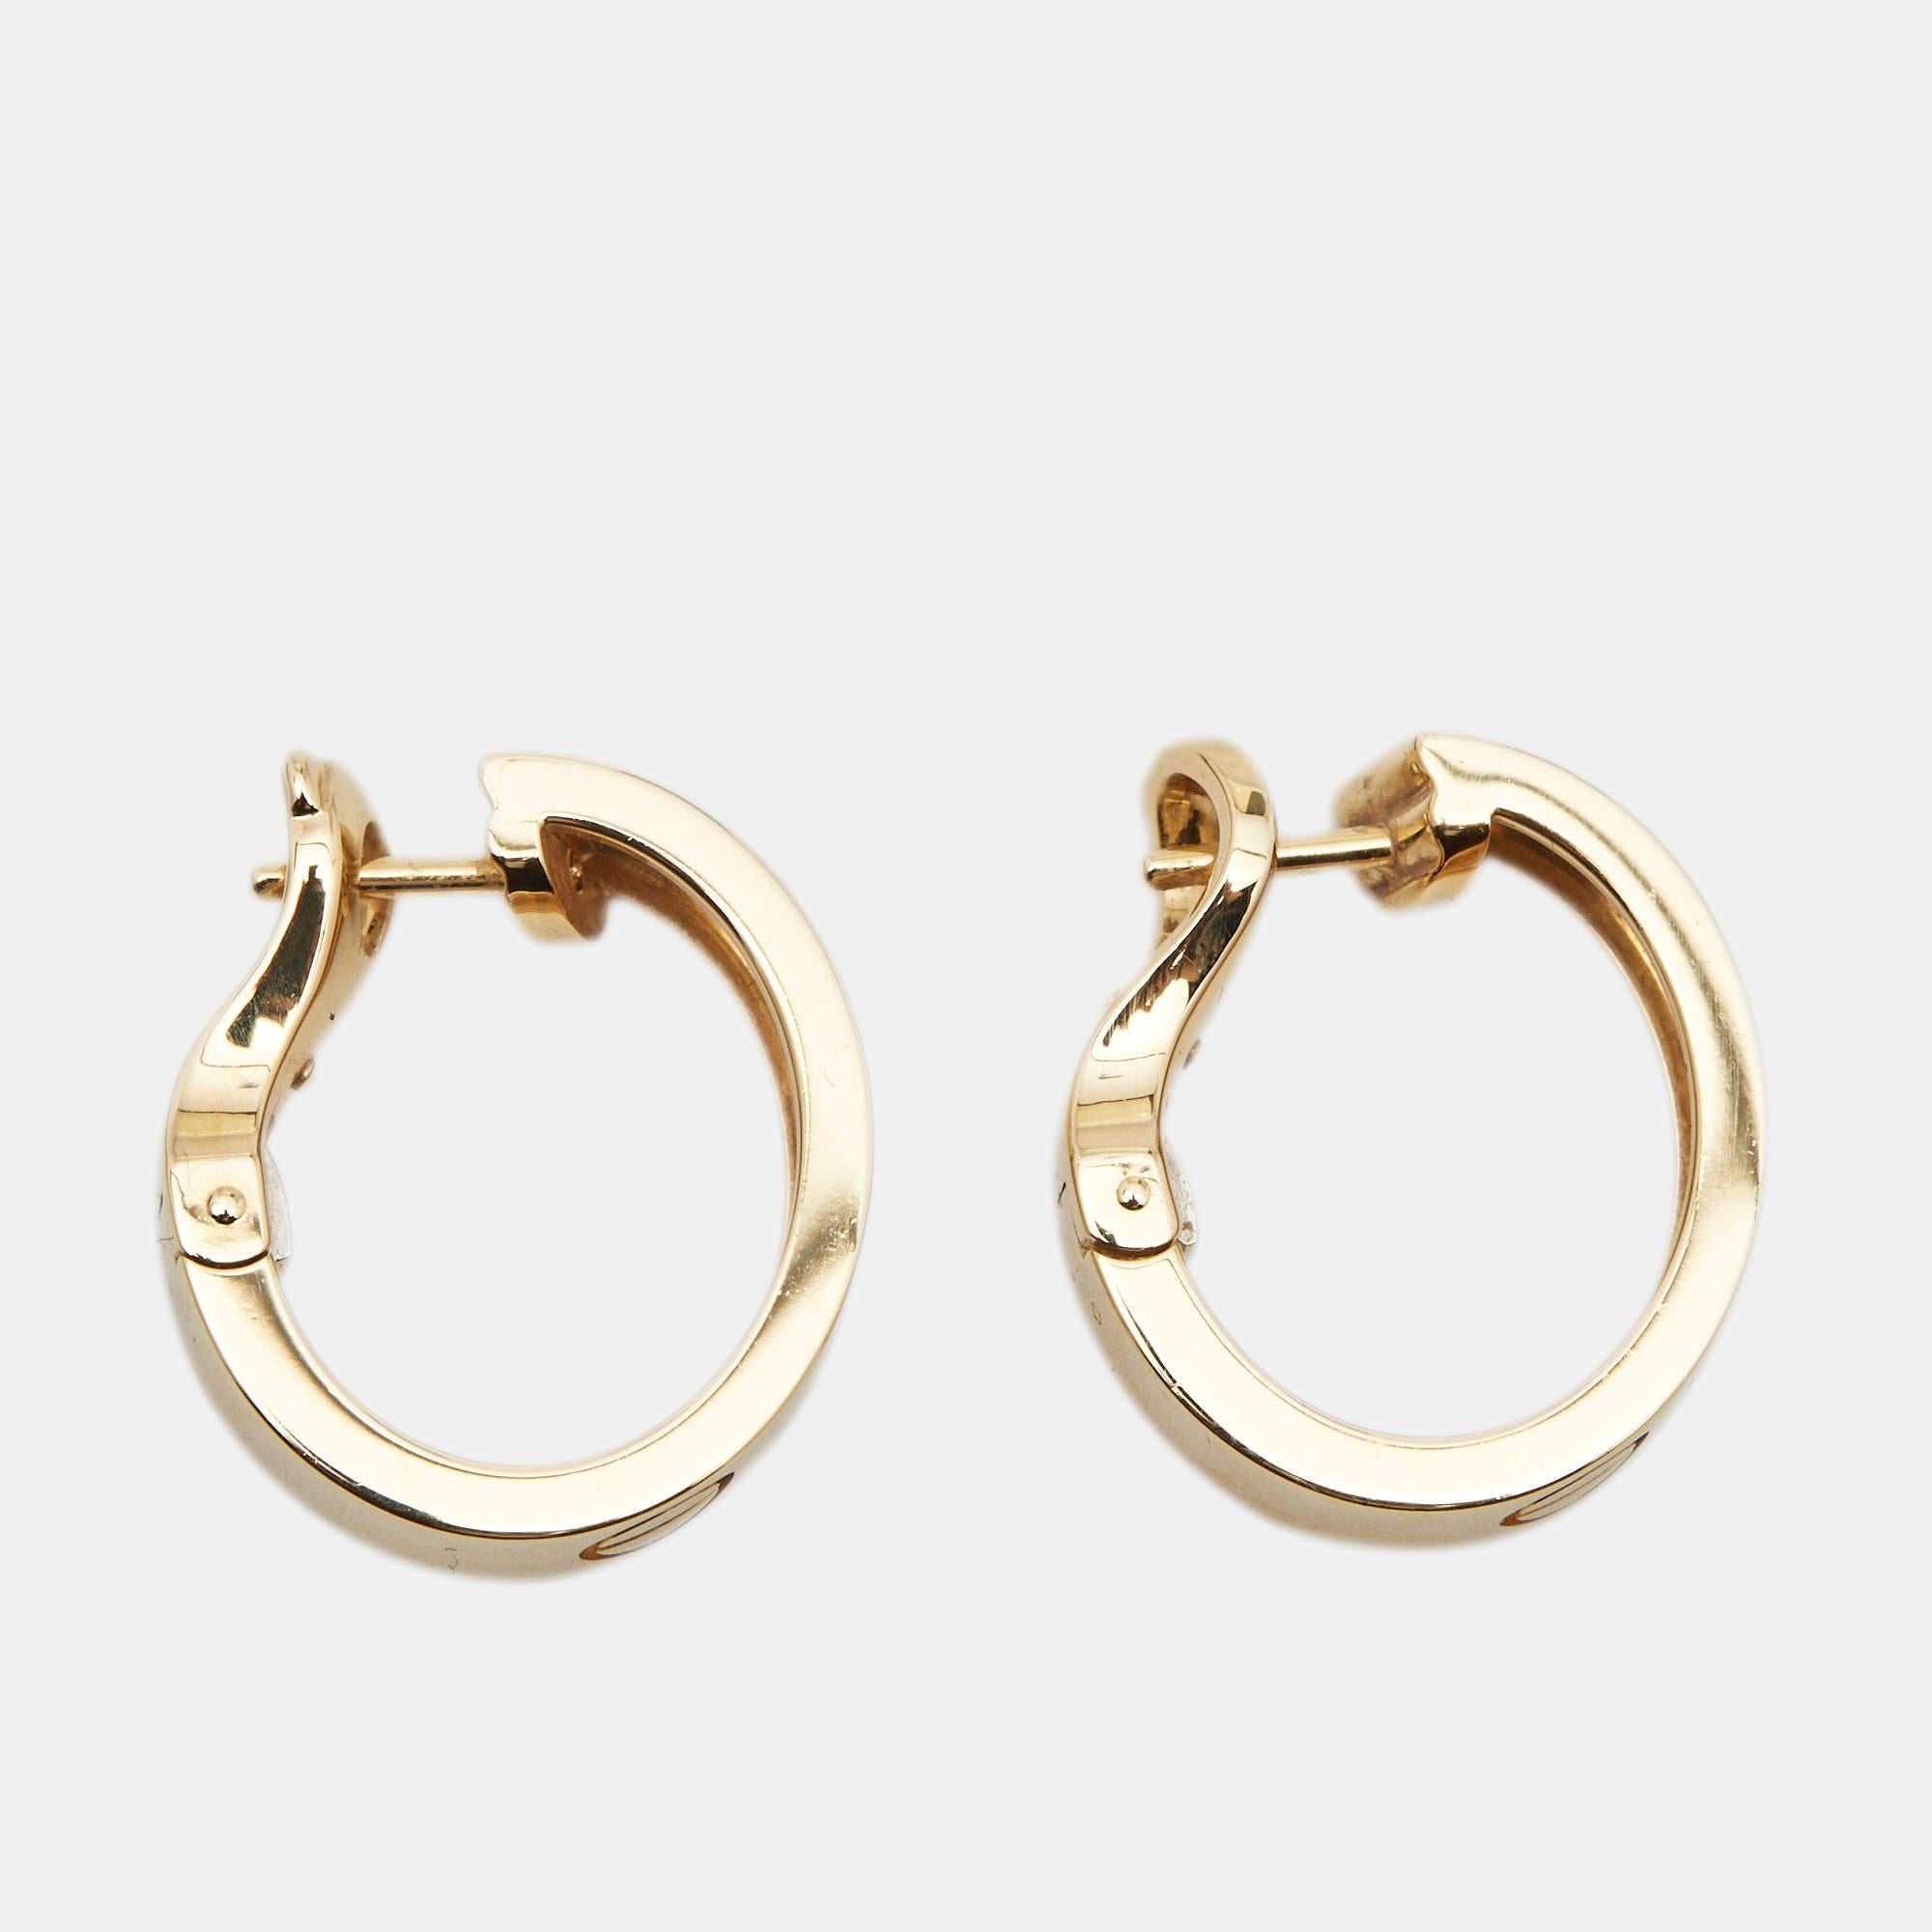 These Cartier earrings can be your staple pick. They have been sculpted using 18k yellow gold into a hoop style with brand detailing and recognizable motifs to form a stunning outline.

Includes: Authenticity Card